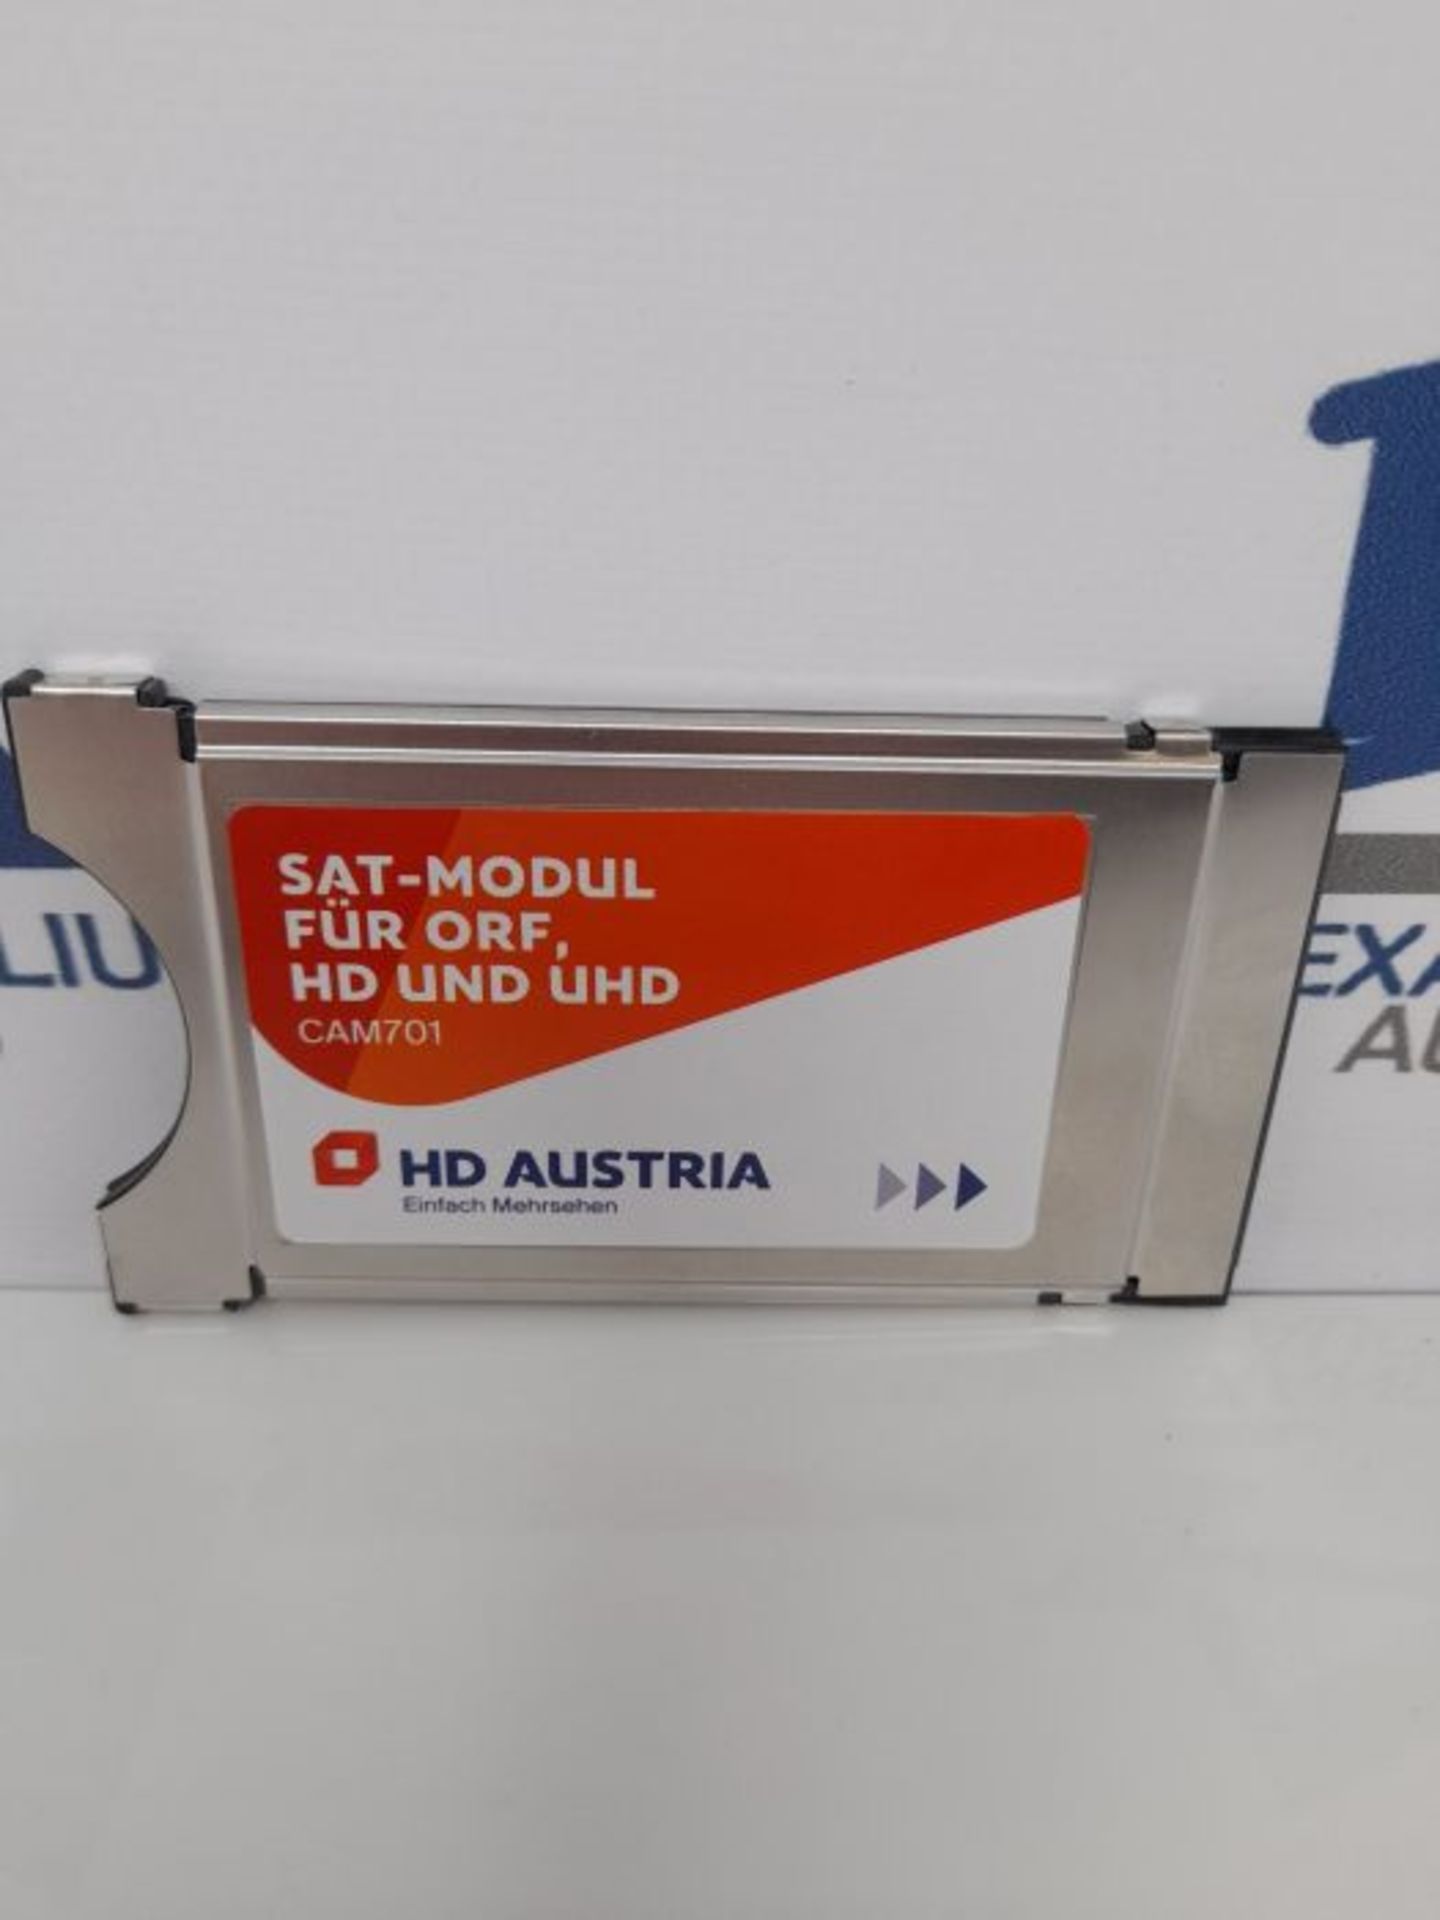 RRP £52.00 HD Austria SAT module for ORF, HD and UHD - Image 2 of 3